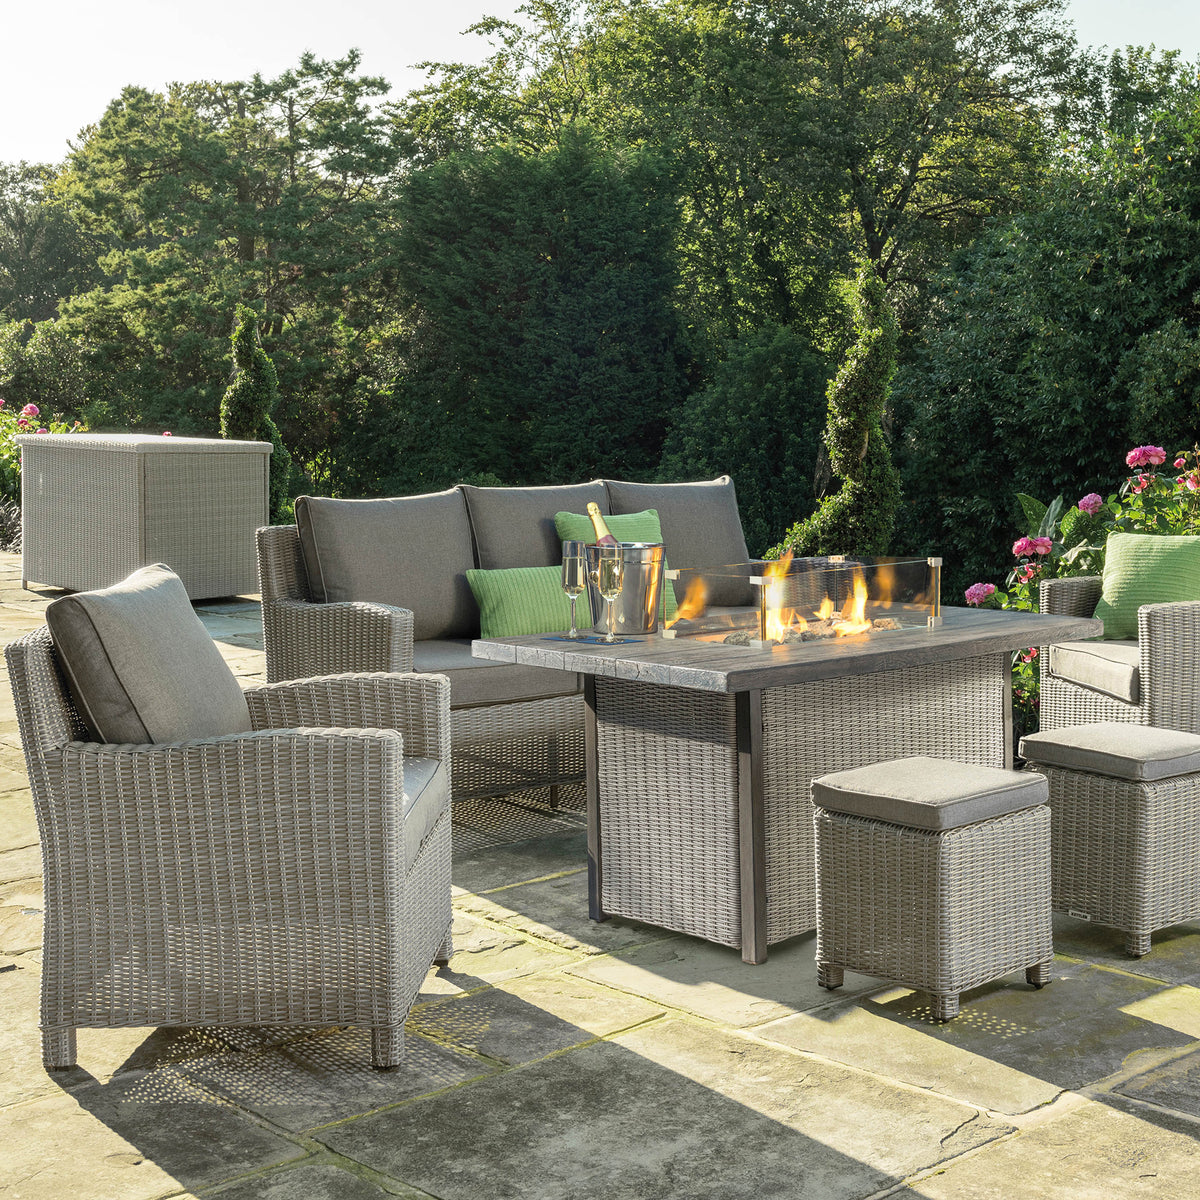 Kettler Palma White Wash Wicker Outdoor Casual Dining Lounge Sofa Set with Fire Pit Table